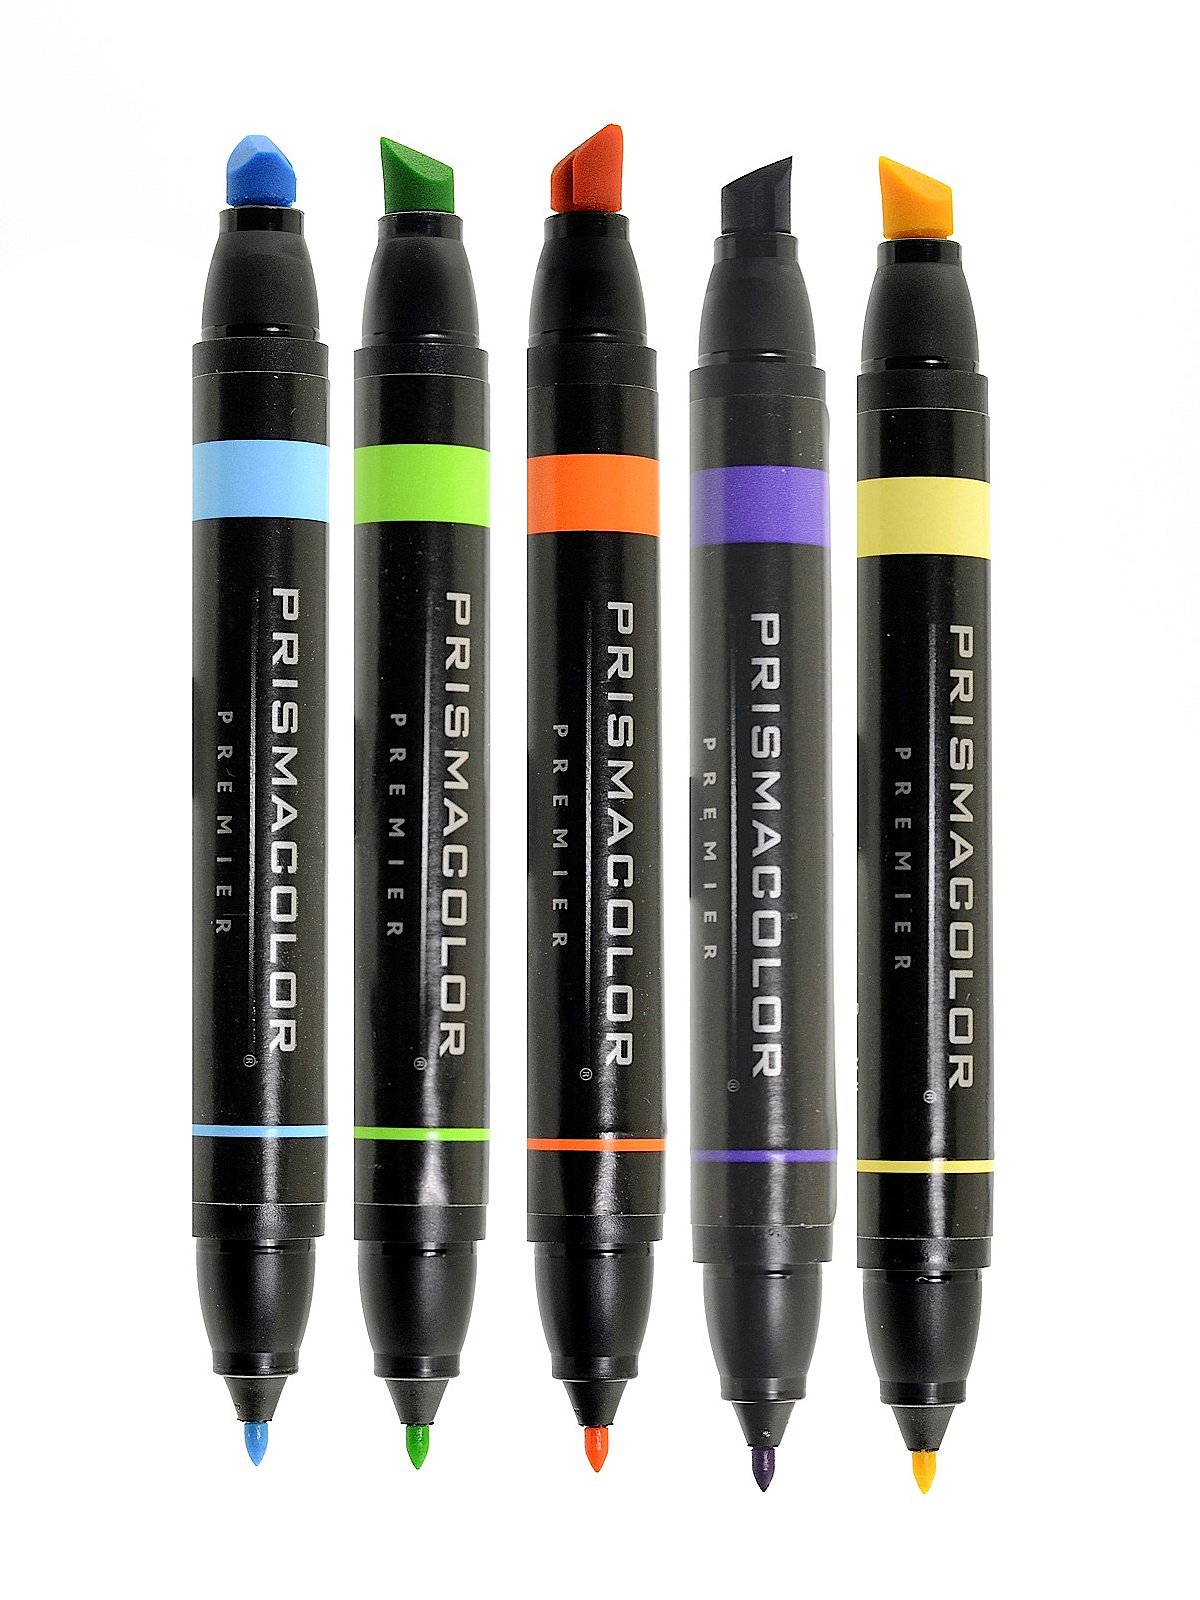 Which markers are the best choice for interior and architectural